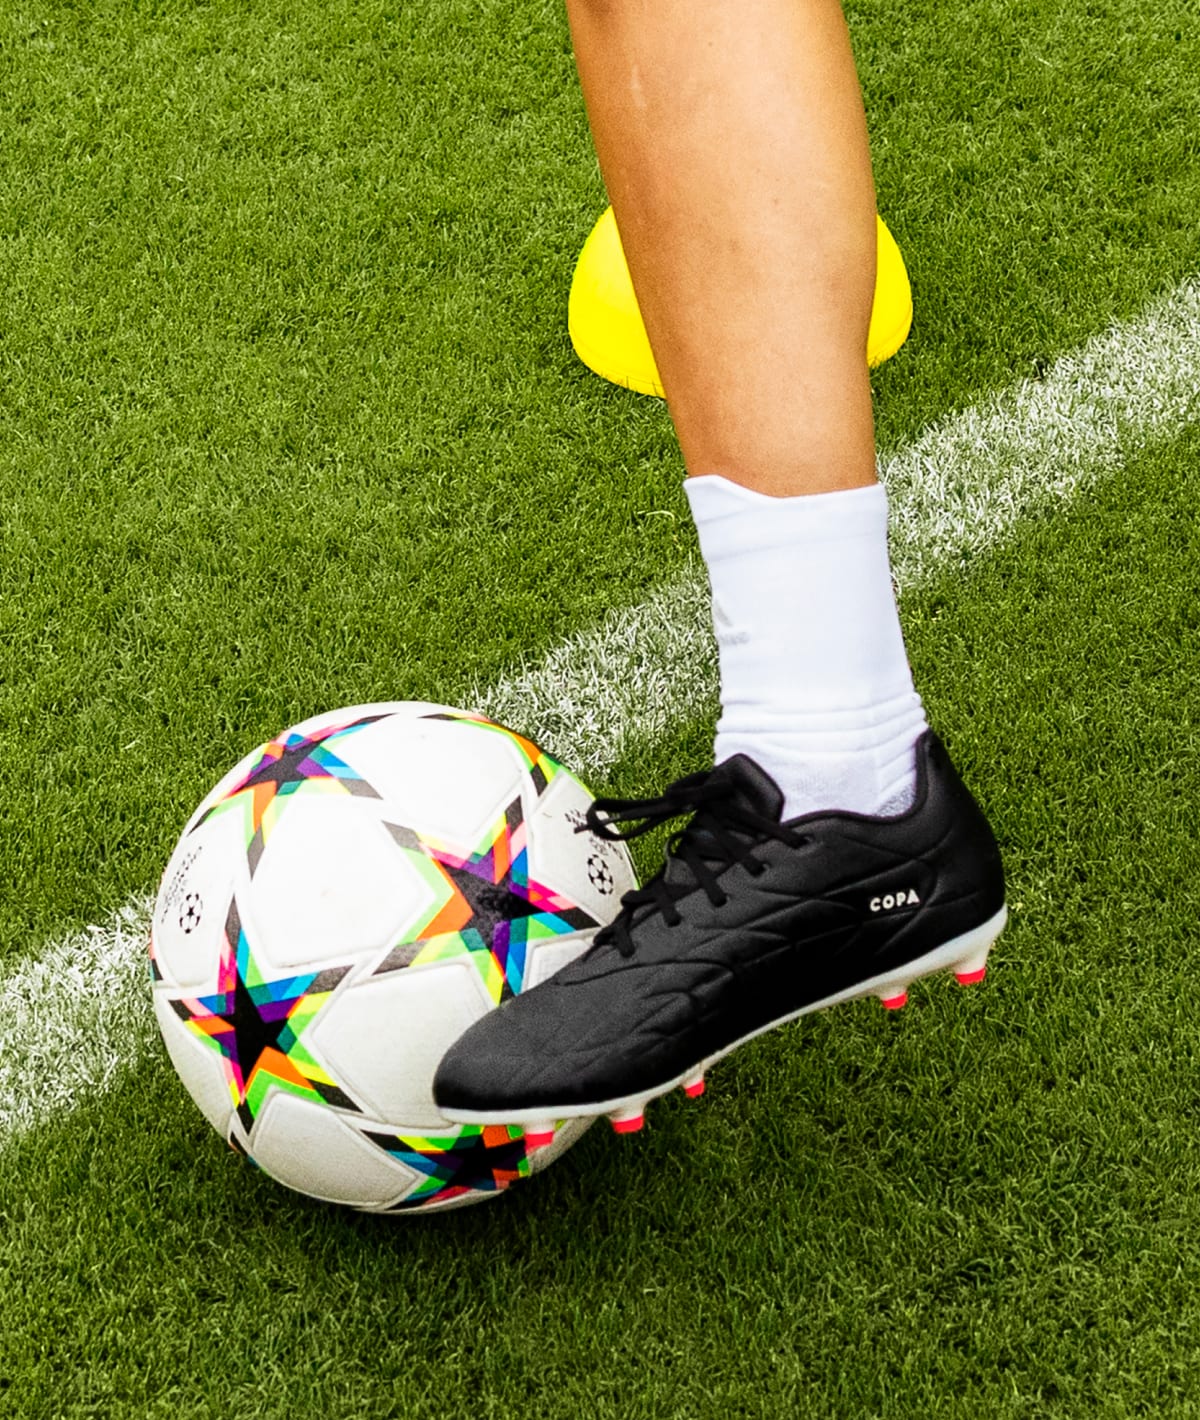 How to Buy Soccer Cleats Fit, Features, Field Surface